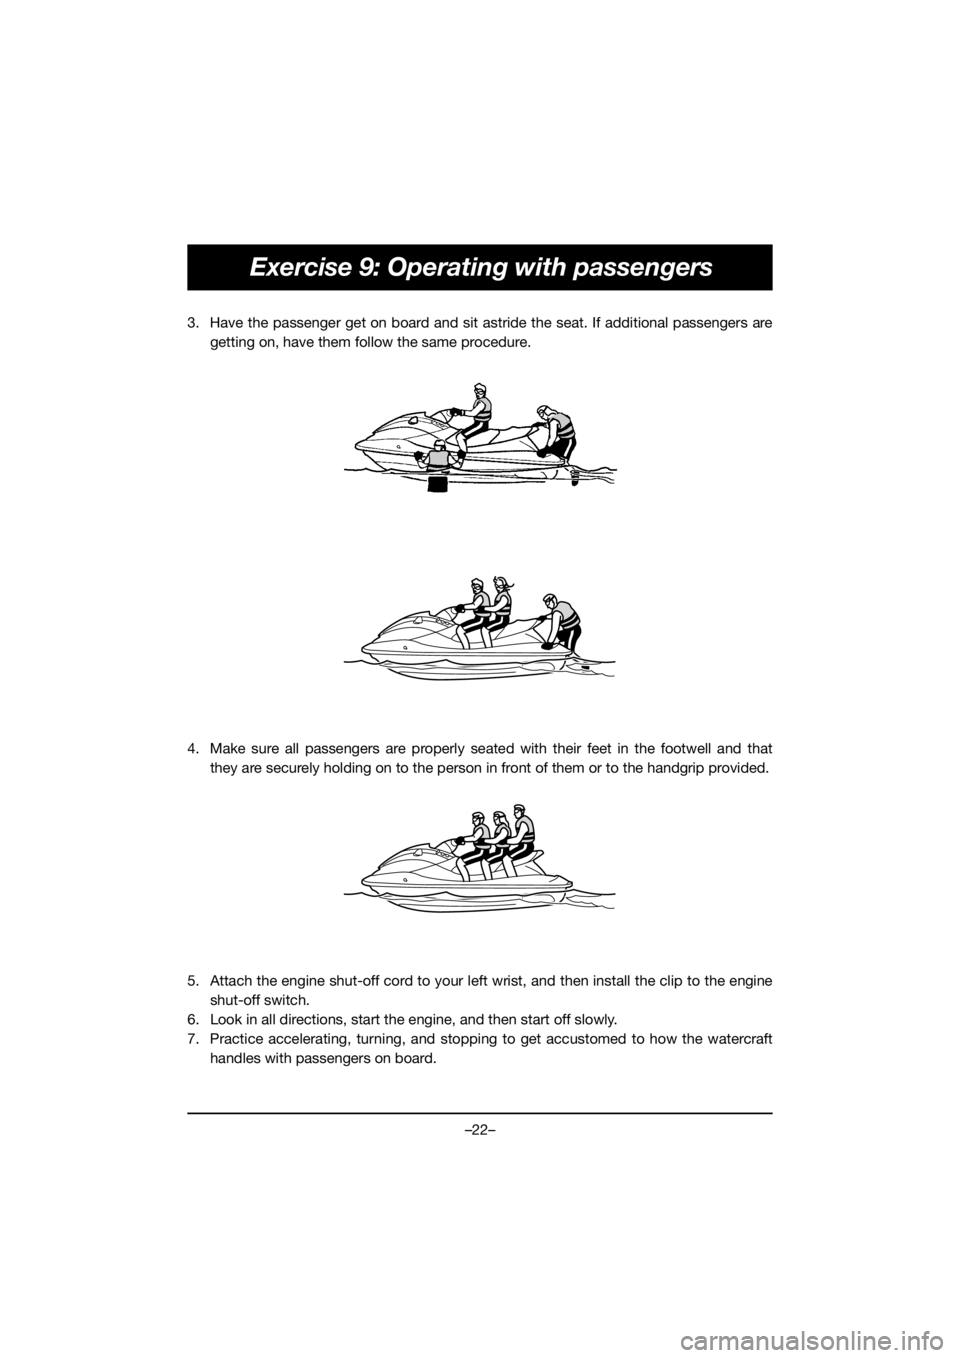 YAMAHA FJR1300 2020  Notices Demploi (in French) –22–
Exercise 9: Operating with passengers
3. Have the passenger get on board and sit astride the seat. If additional passengers are
getting on, have them follow the same procedure. 
4. Make sure 